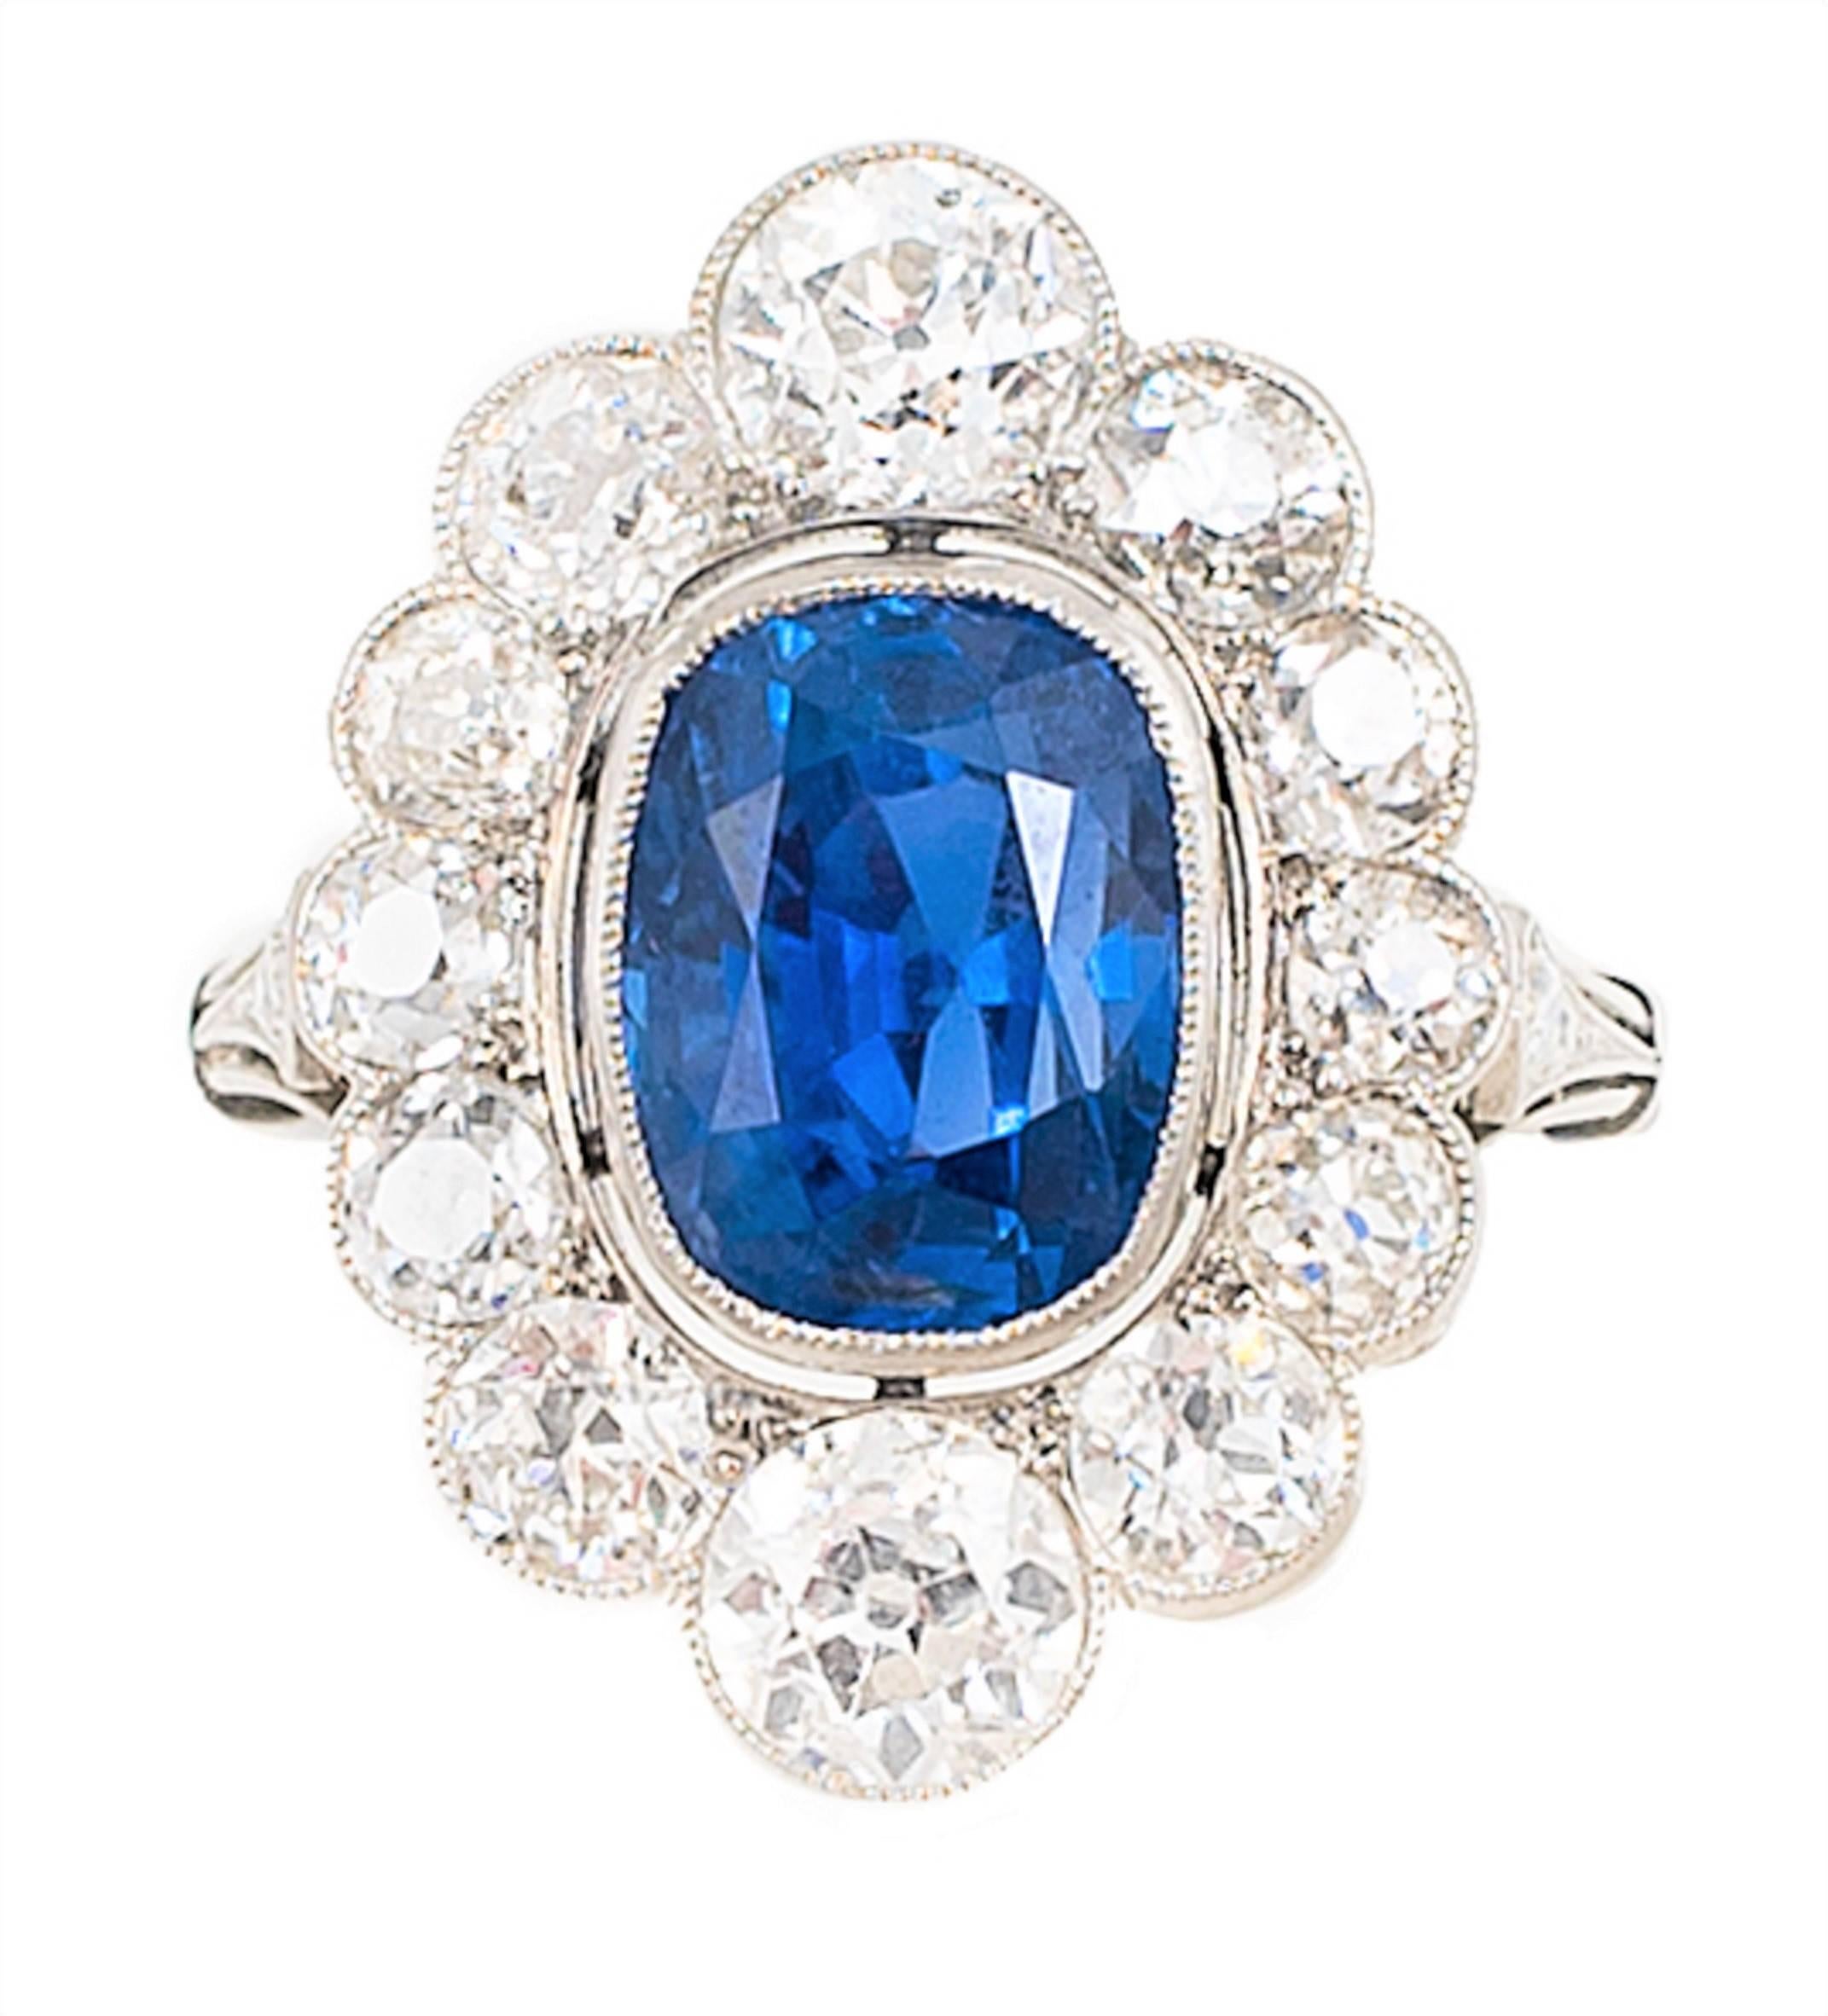 AGL Certified 5.32 Ct. UNTREATED Burma Sapphire Diamond Platinum Edwardian Ring In Excellent Condition For Sale In Calabasas, CA